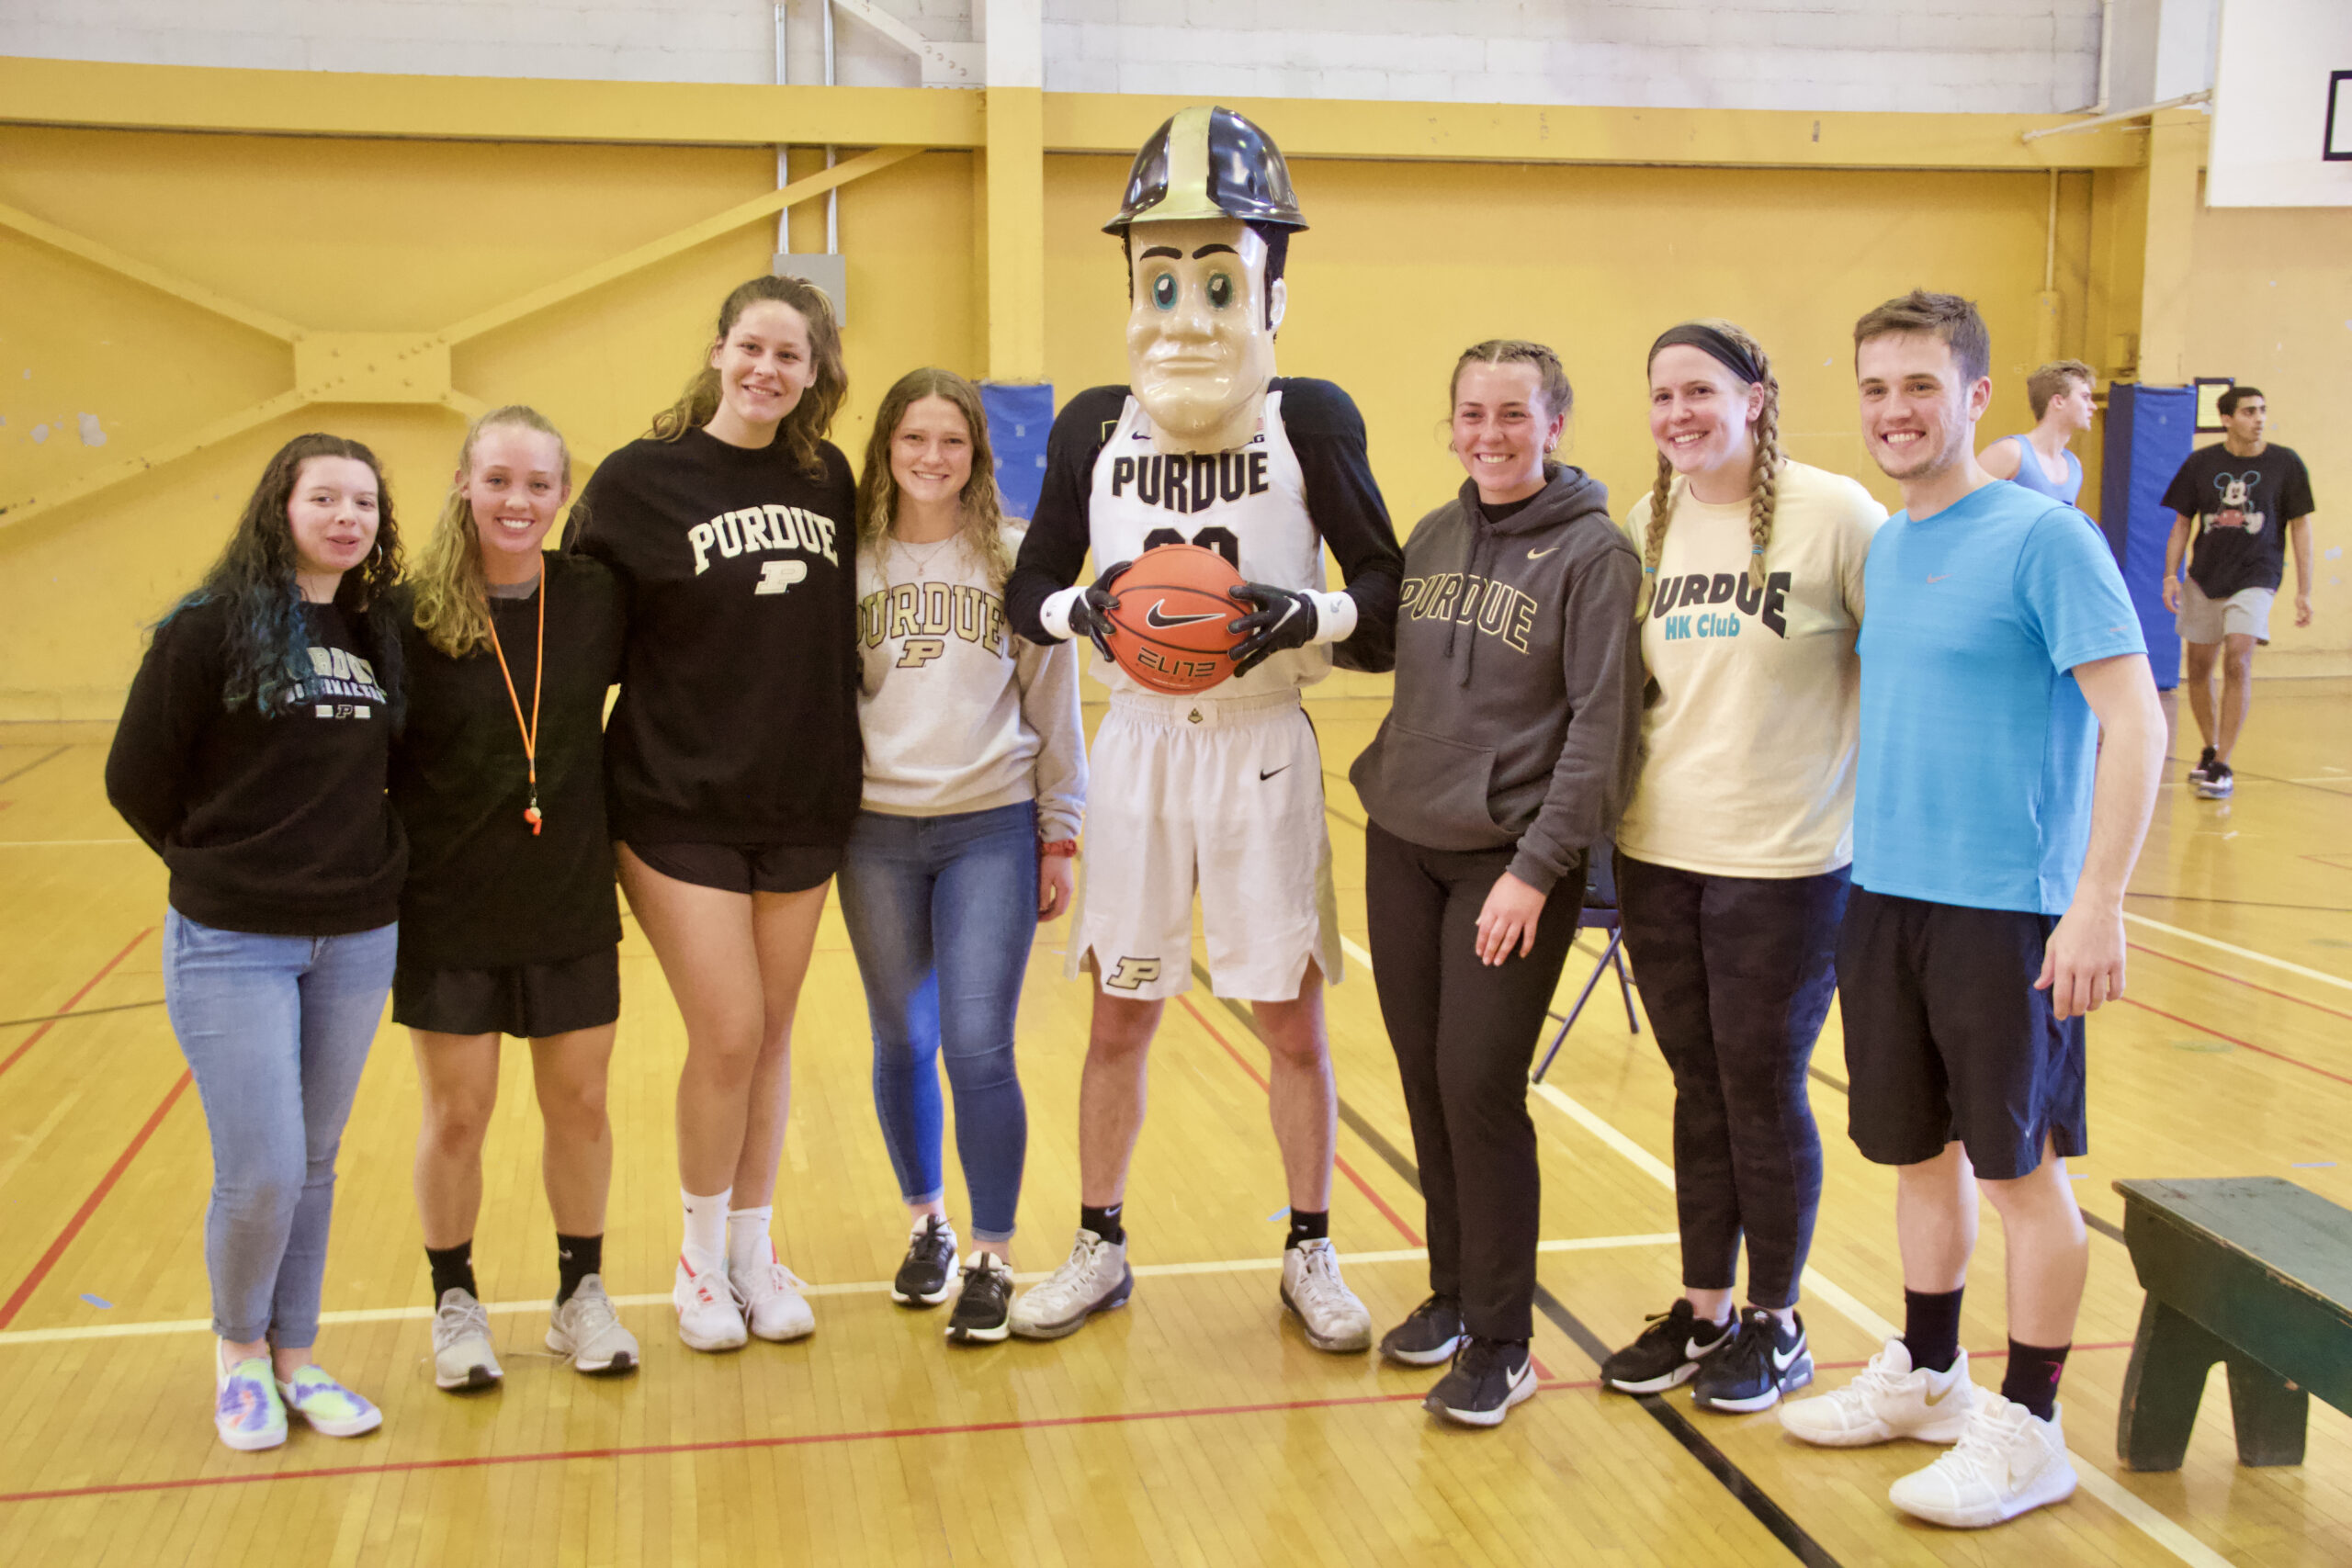 HK Club members pose for a picture with Purdue Pete.